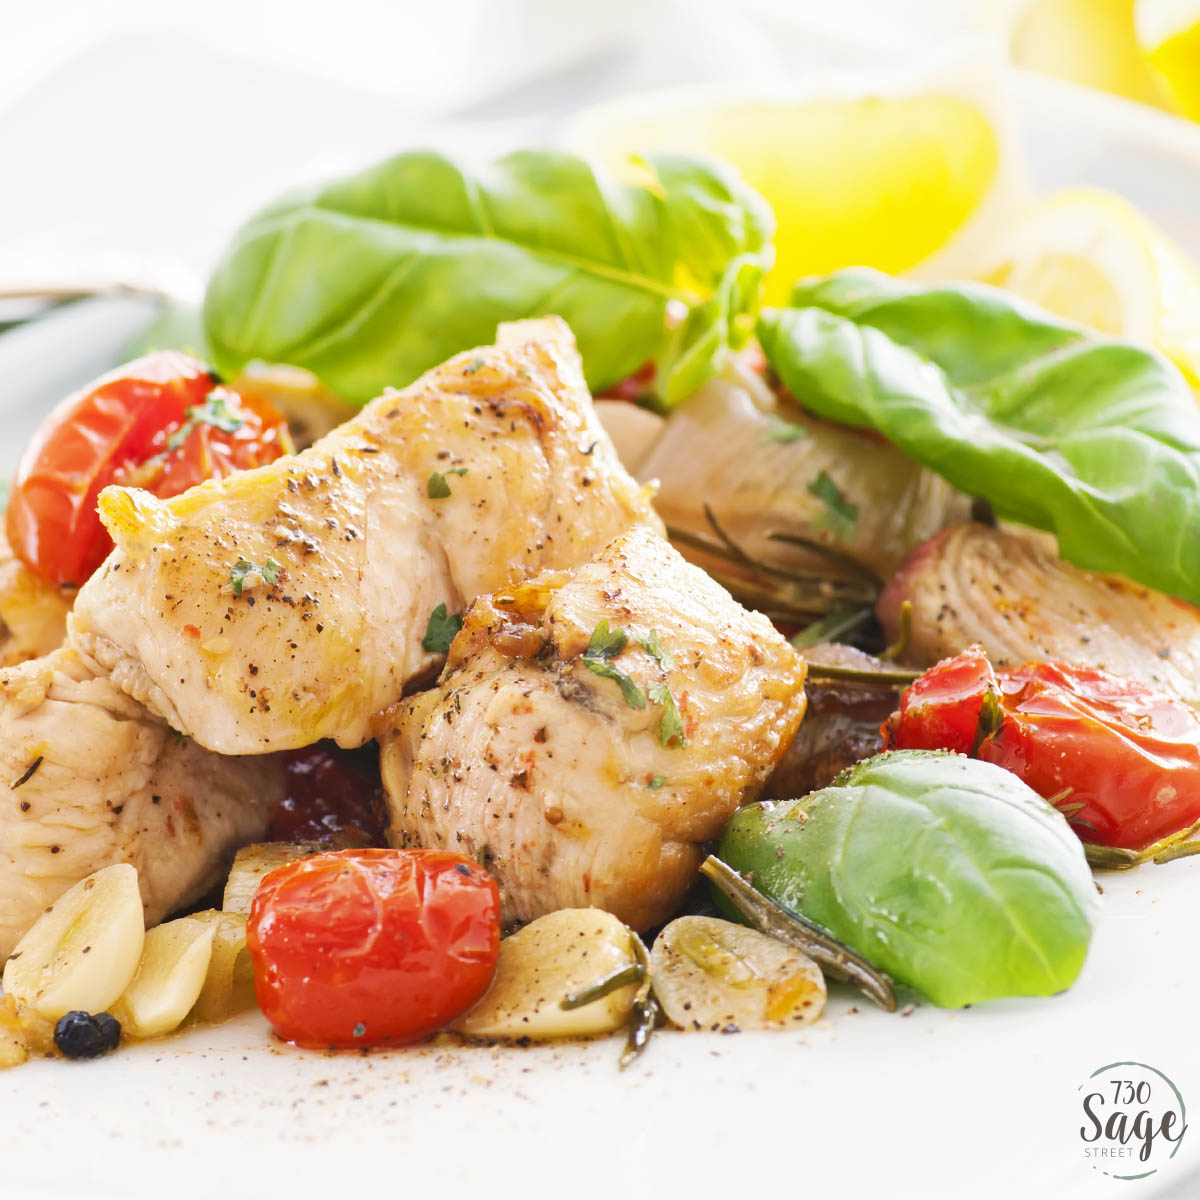 Basil Recipes With Chicken